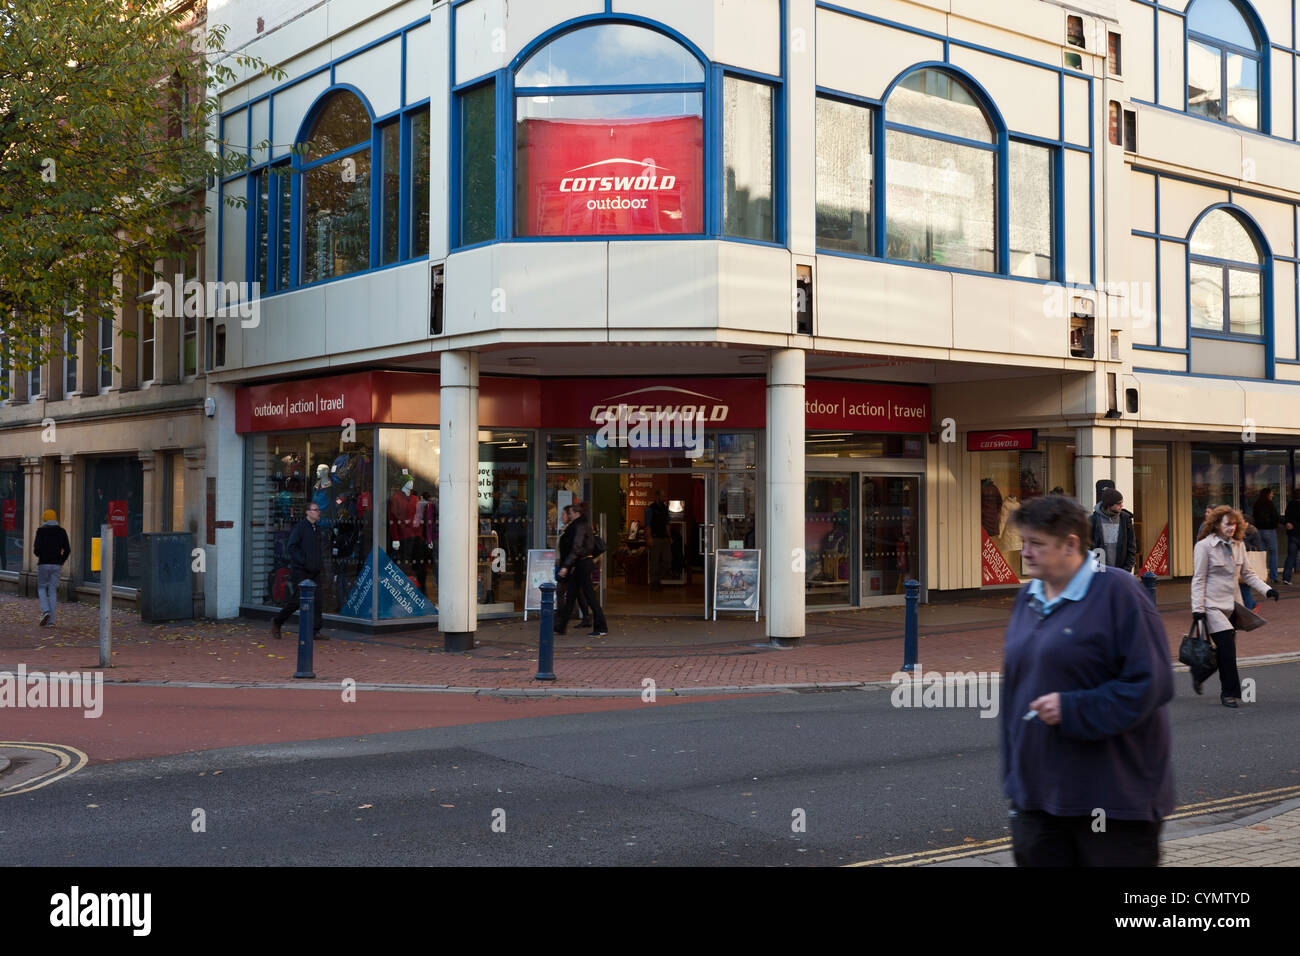 Cotswold outdoor action travel clothing store, Broadmead Bristol England UK. Stock Photo